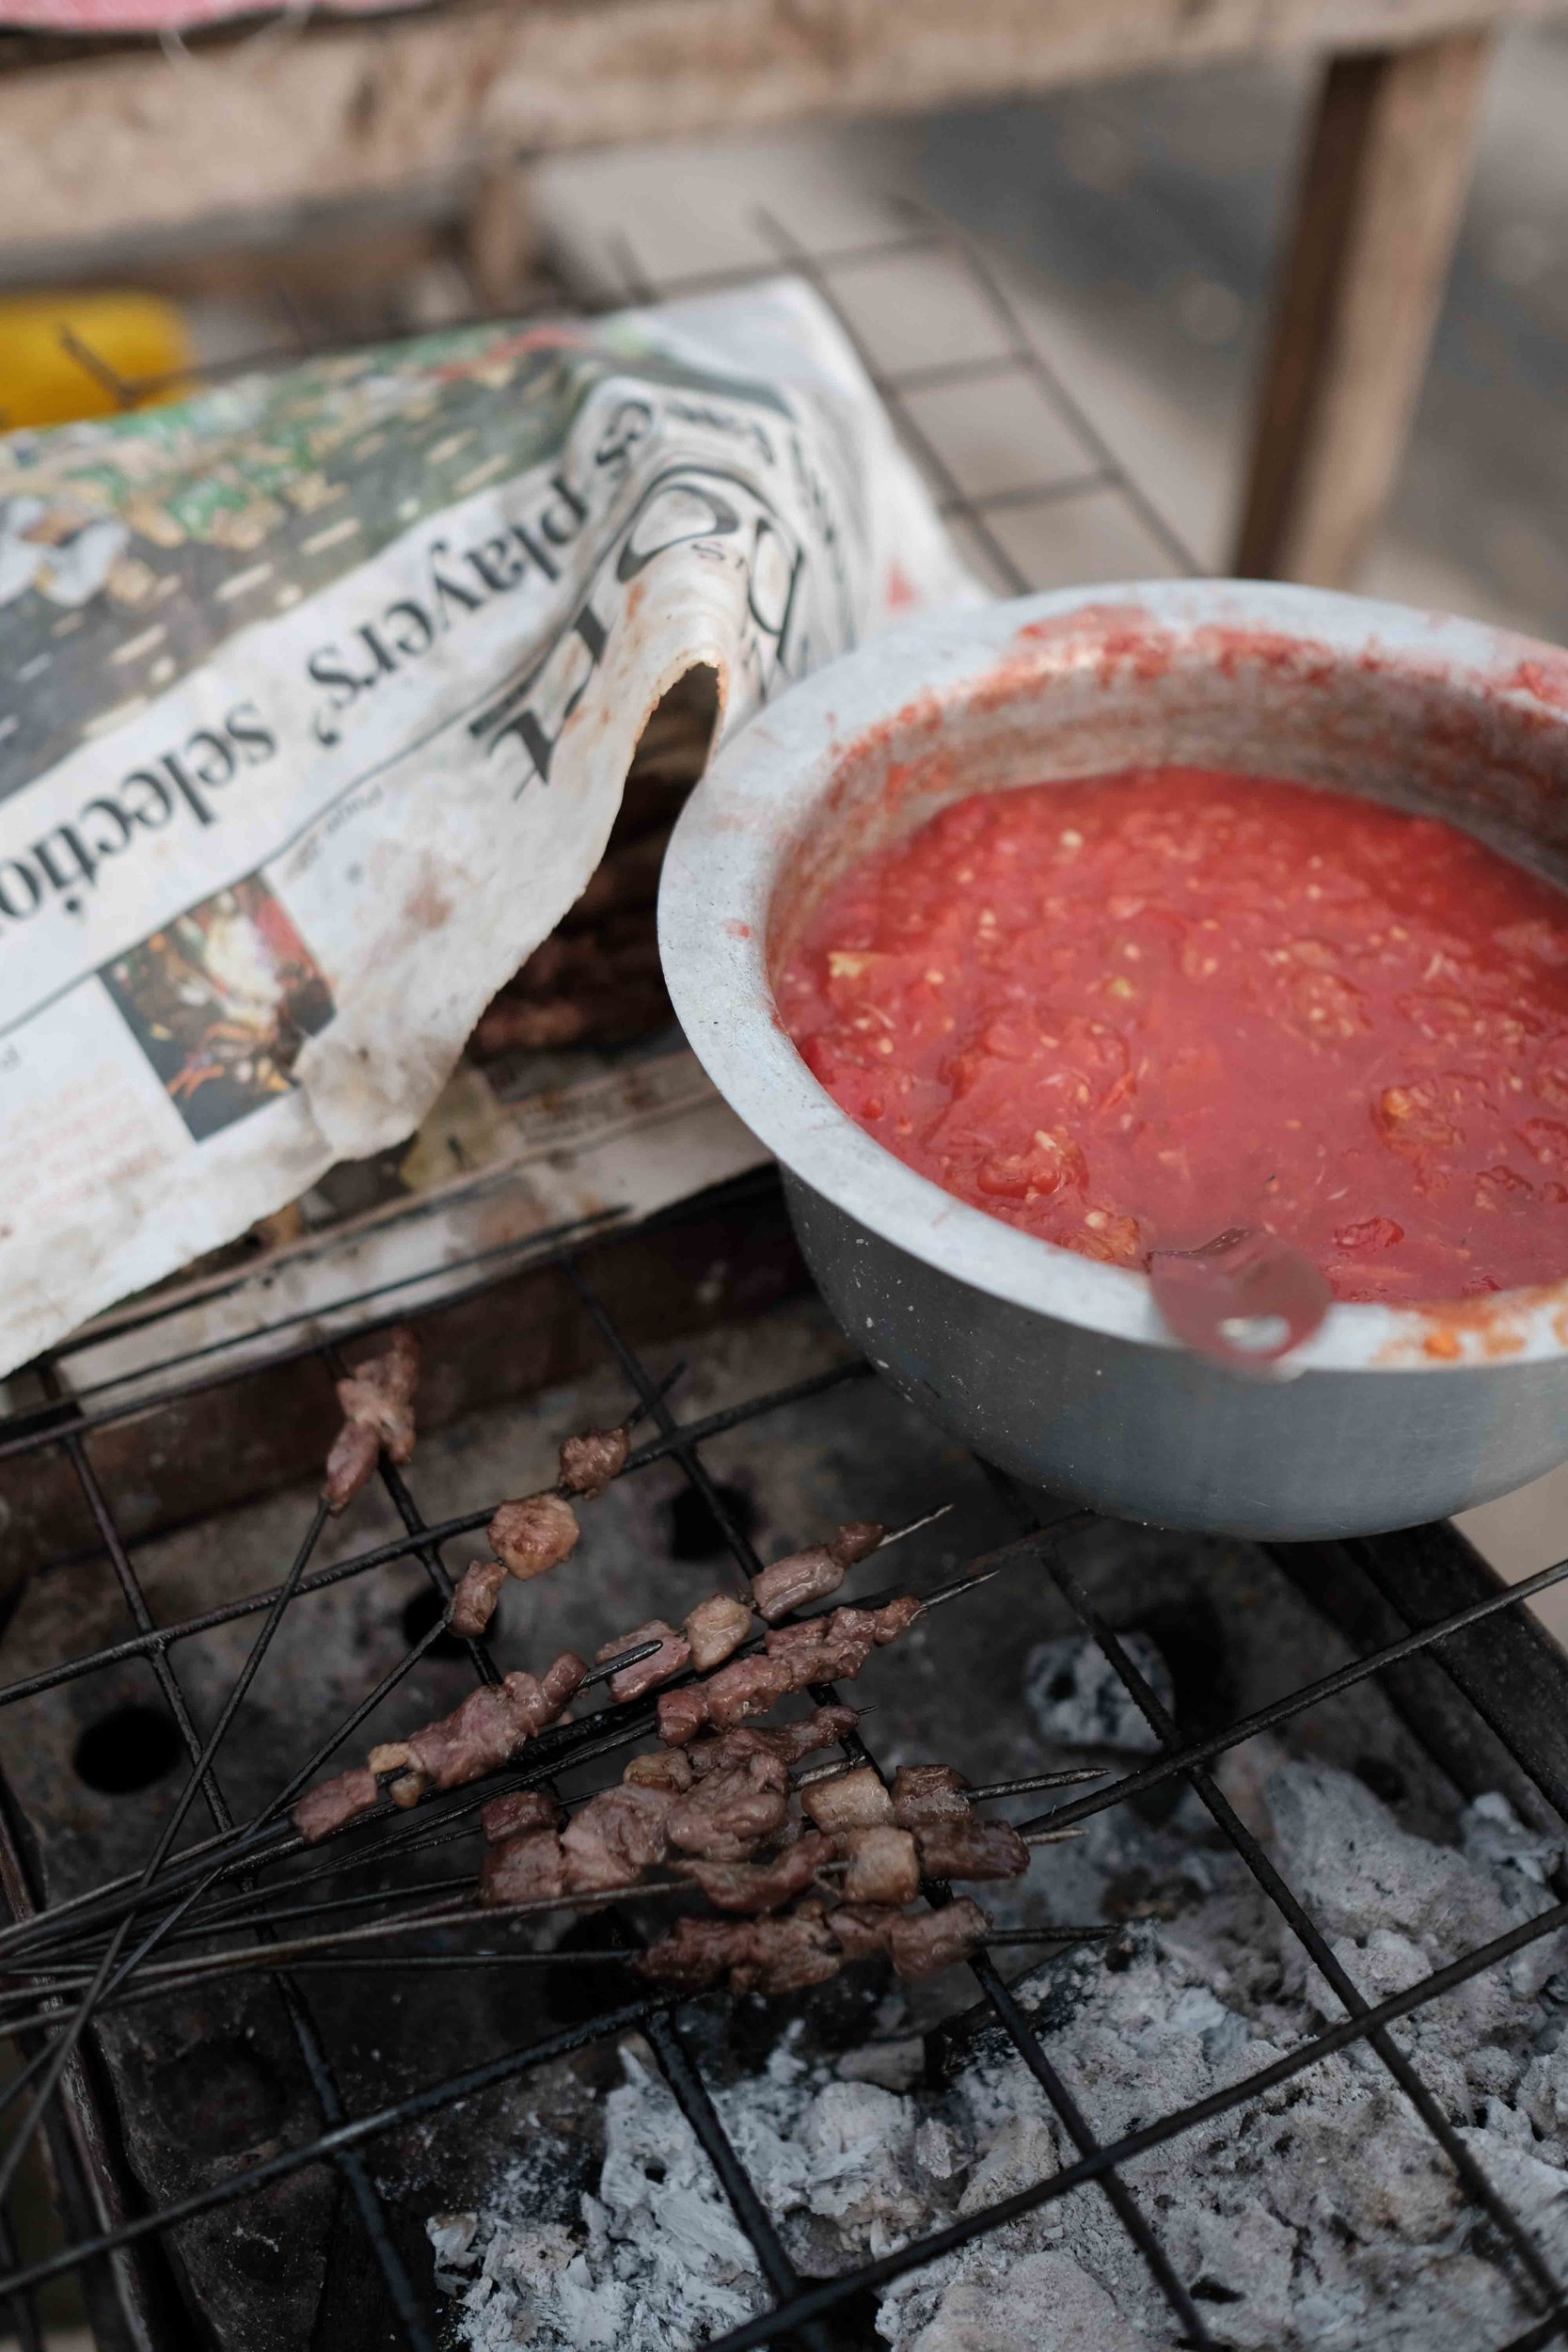 Hot chilly and tomato sauce compliments the grilled meat